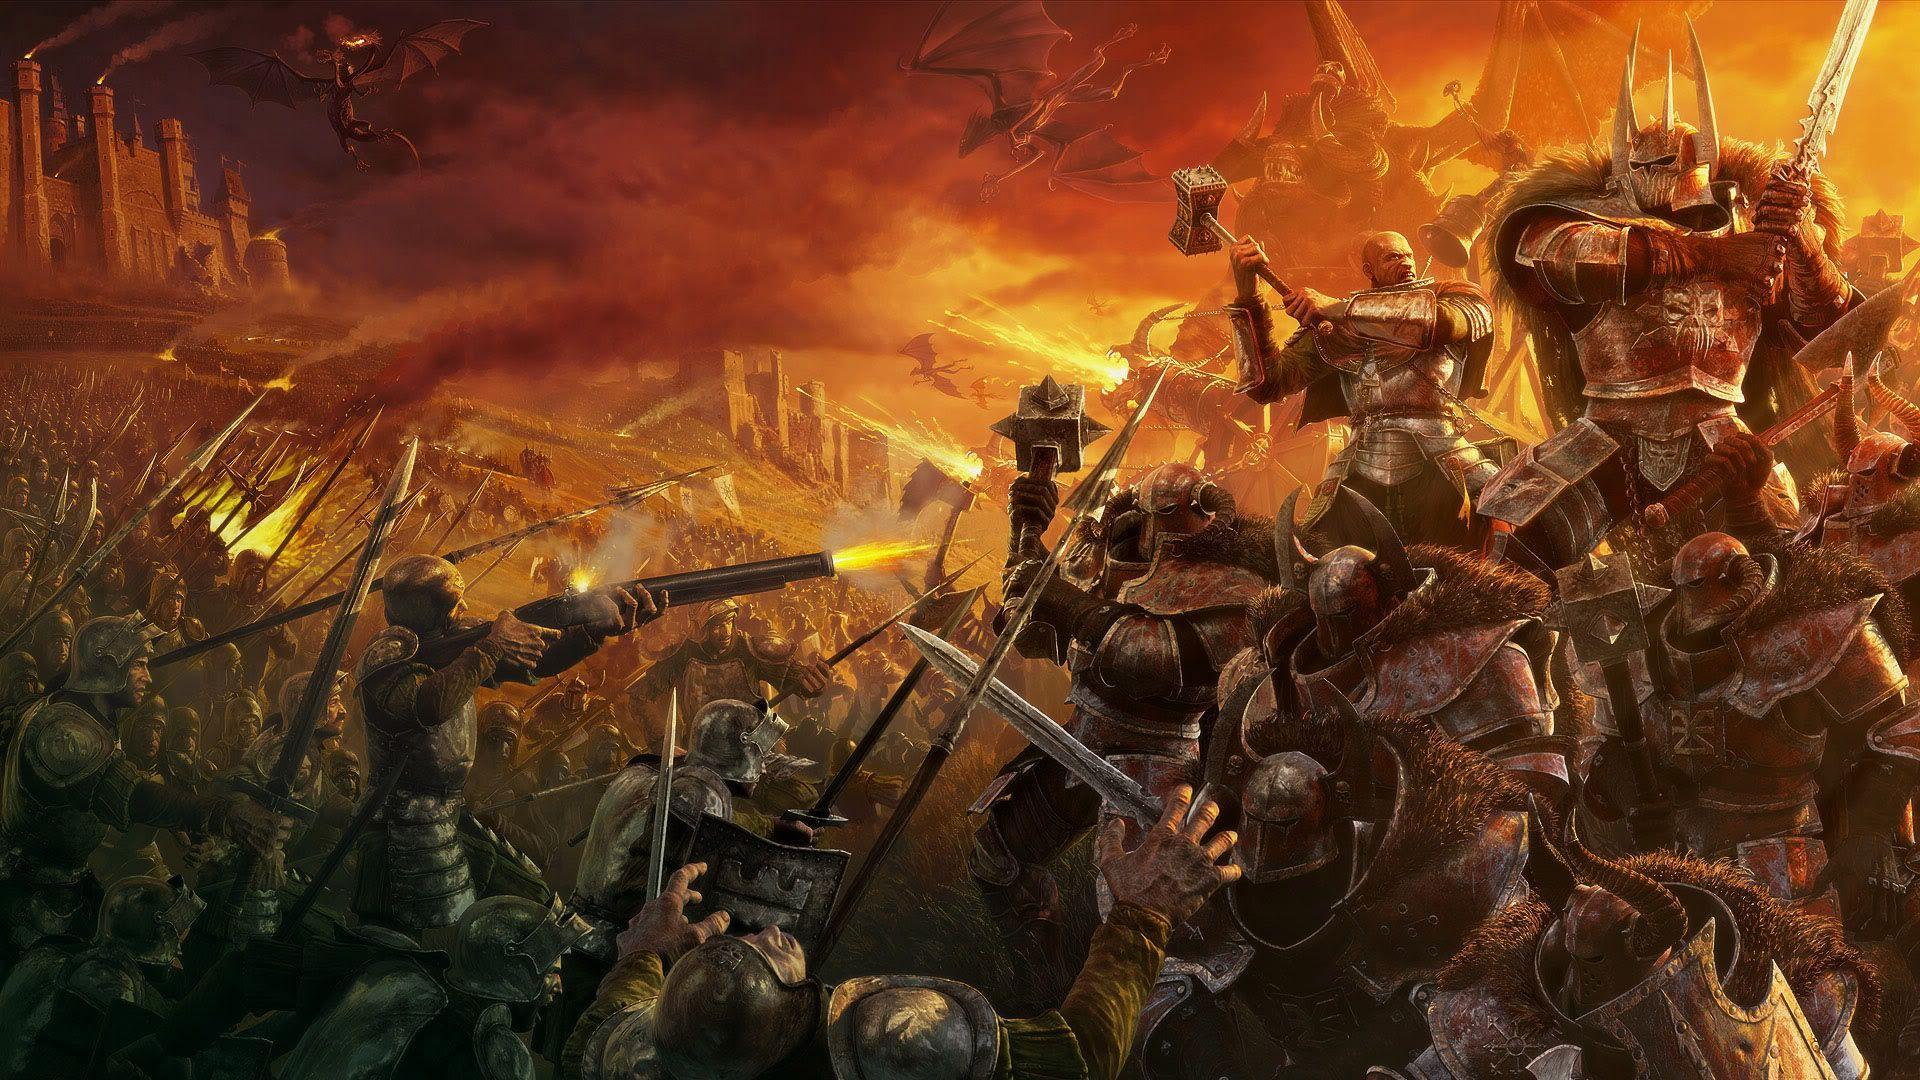 Latest Age Of Empires HD Wallpaper Free Download. New HD